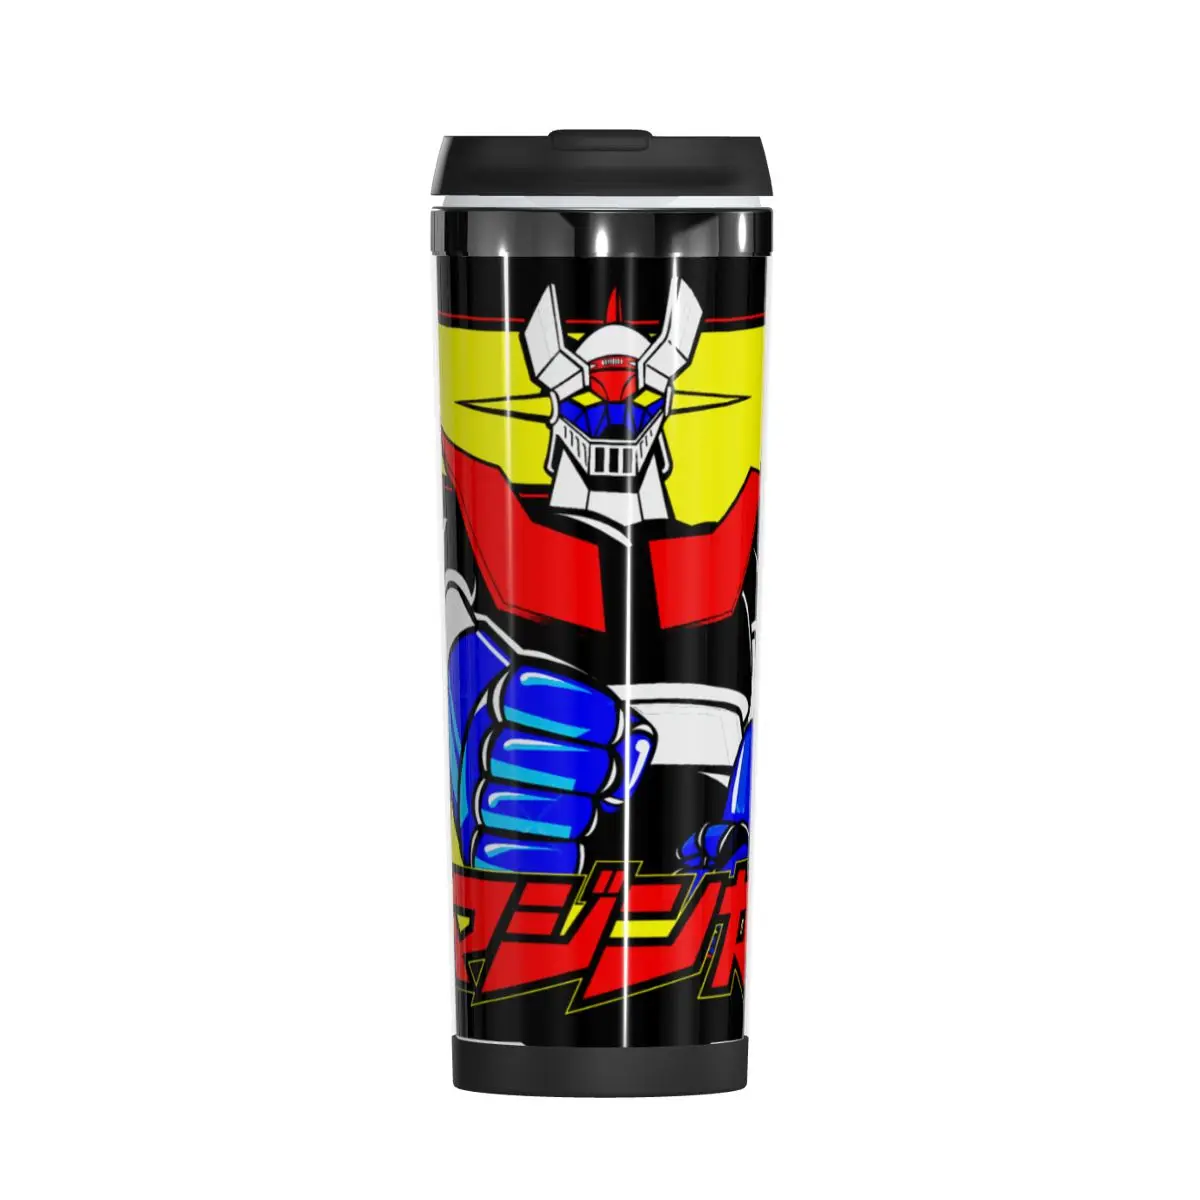 

Goldoraks Grendizer Mazinger Z Double Insulated Water Cup Graphic Thermos bottle Mug Humor Graphic Heat Insulation beer mugs